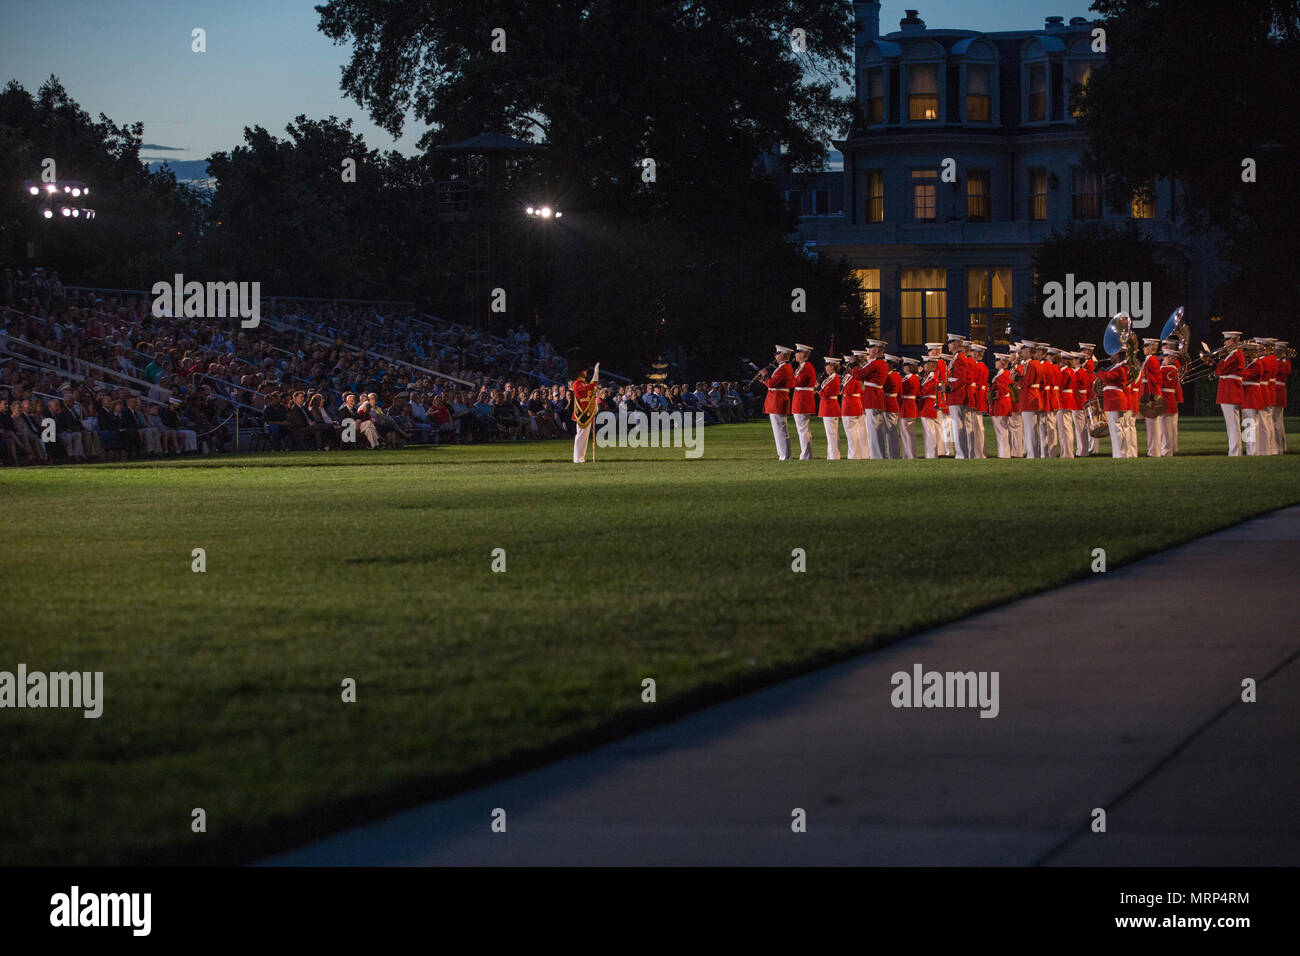 U.S. Marines with 'The Presidents Own' United States Marine Band perform during an evening parade at Marine Barracks Washington, Washington, D.C., June 23, 2017. Evening parades are held as a means of honoring senior officials, distinguished citizens and supporters of the Marine Corps. (U.S. Marine Corps photo by Lance Cpl. Stephon L. McRae) Stock Photo